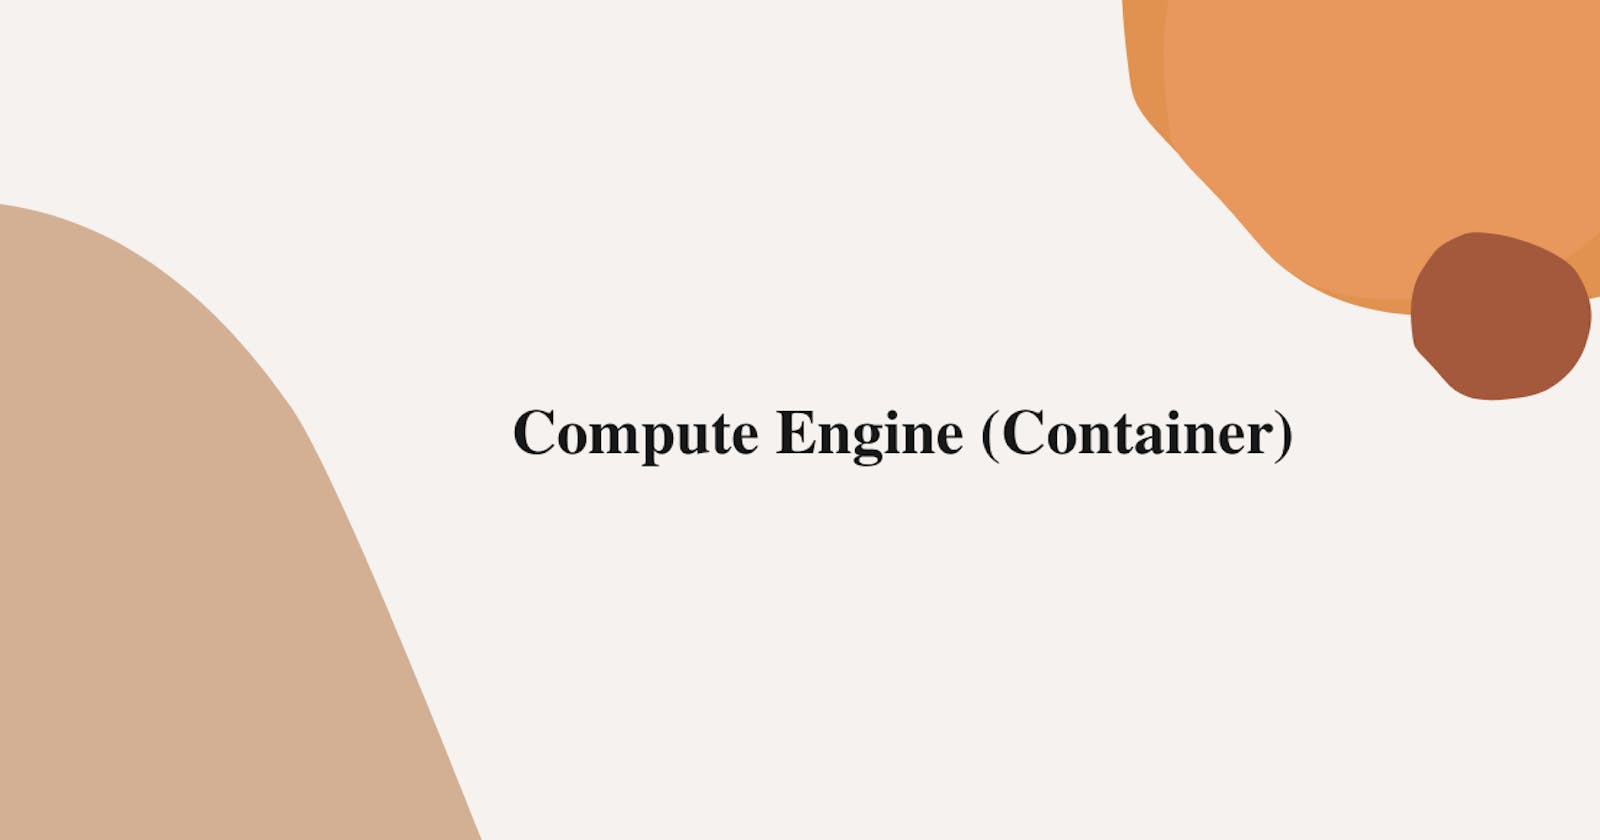 Compute Engine (Container)